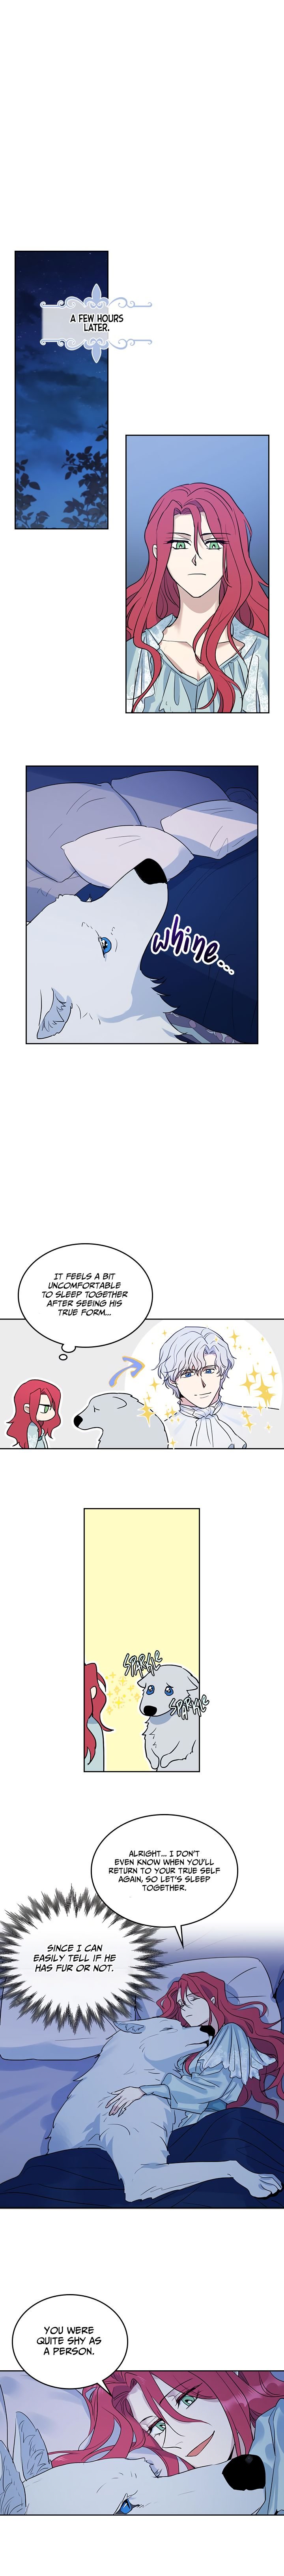 the-lady-and-the-beast-chap-34-6